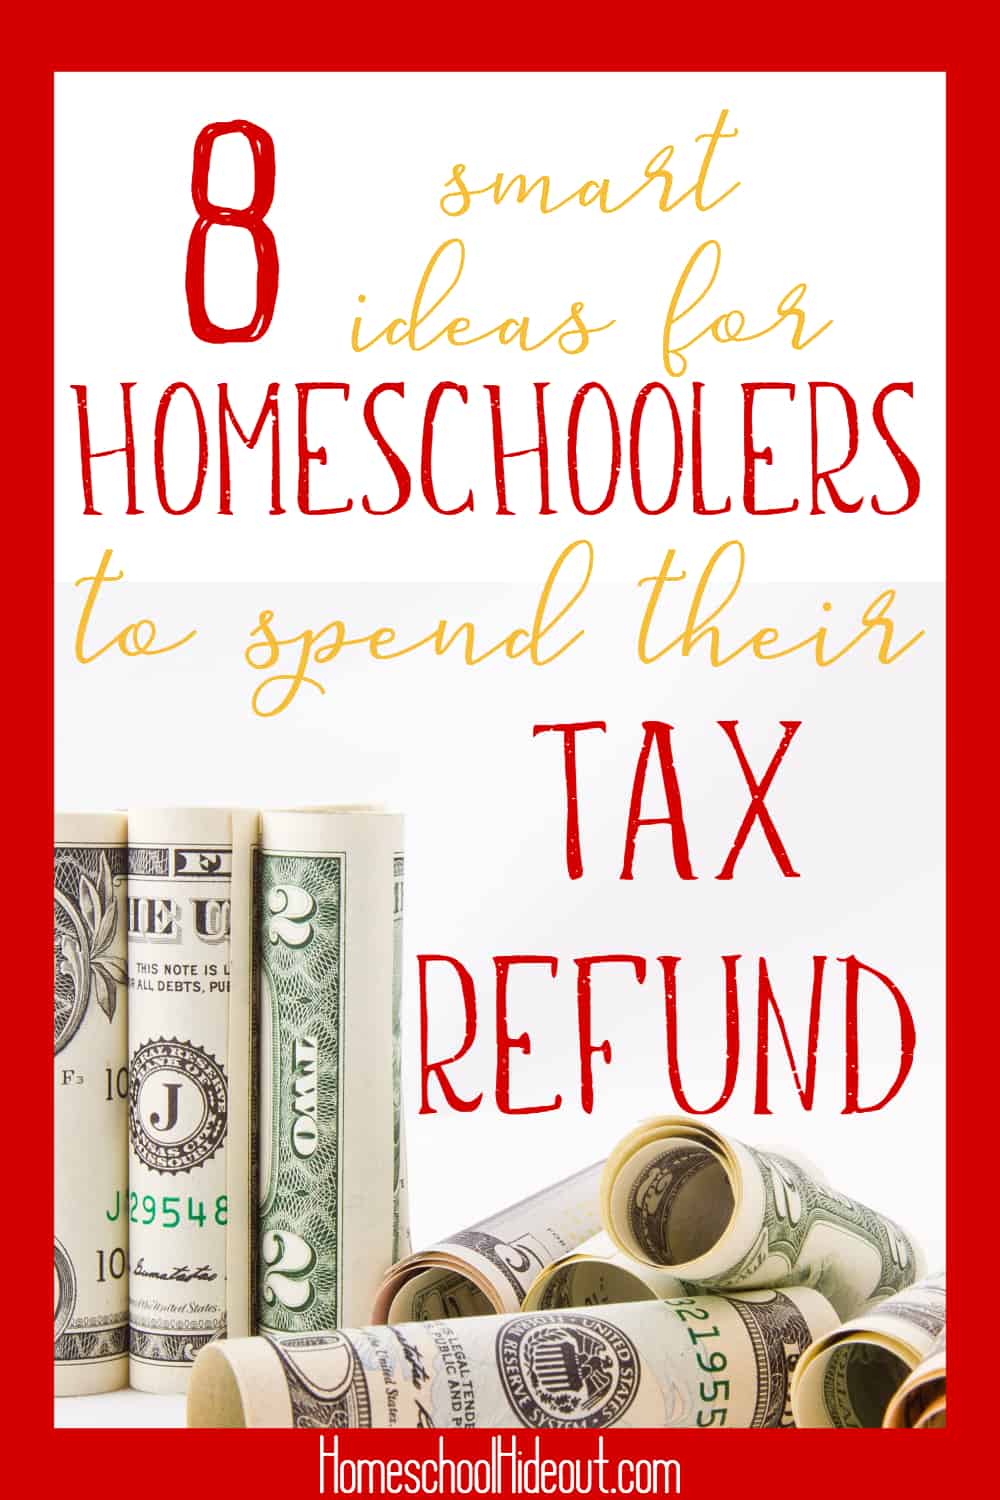 Smart ideas to help homeschoolers spend their tax refunds wisely! #4 is a MUST-DO!